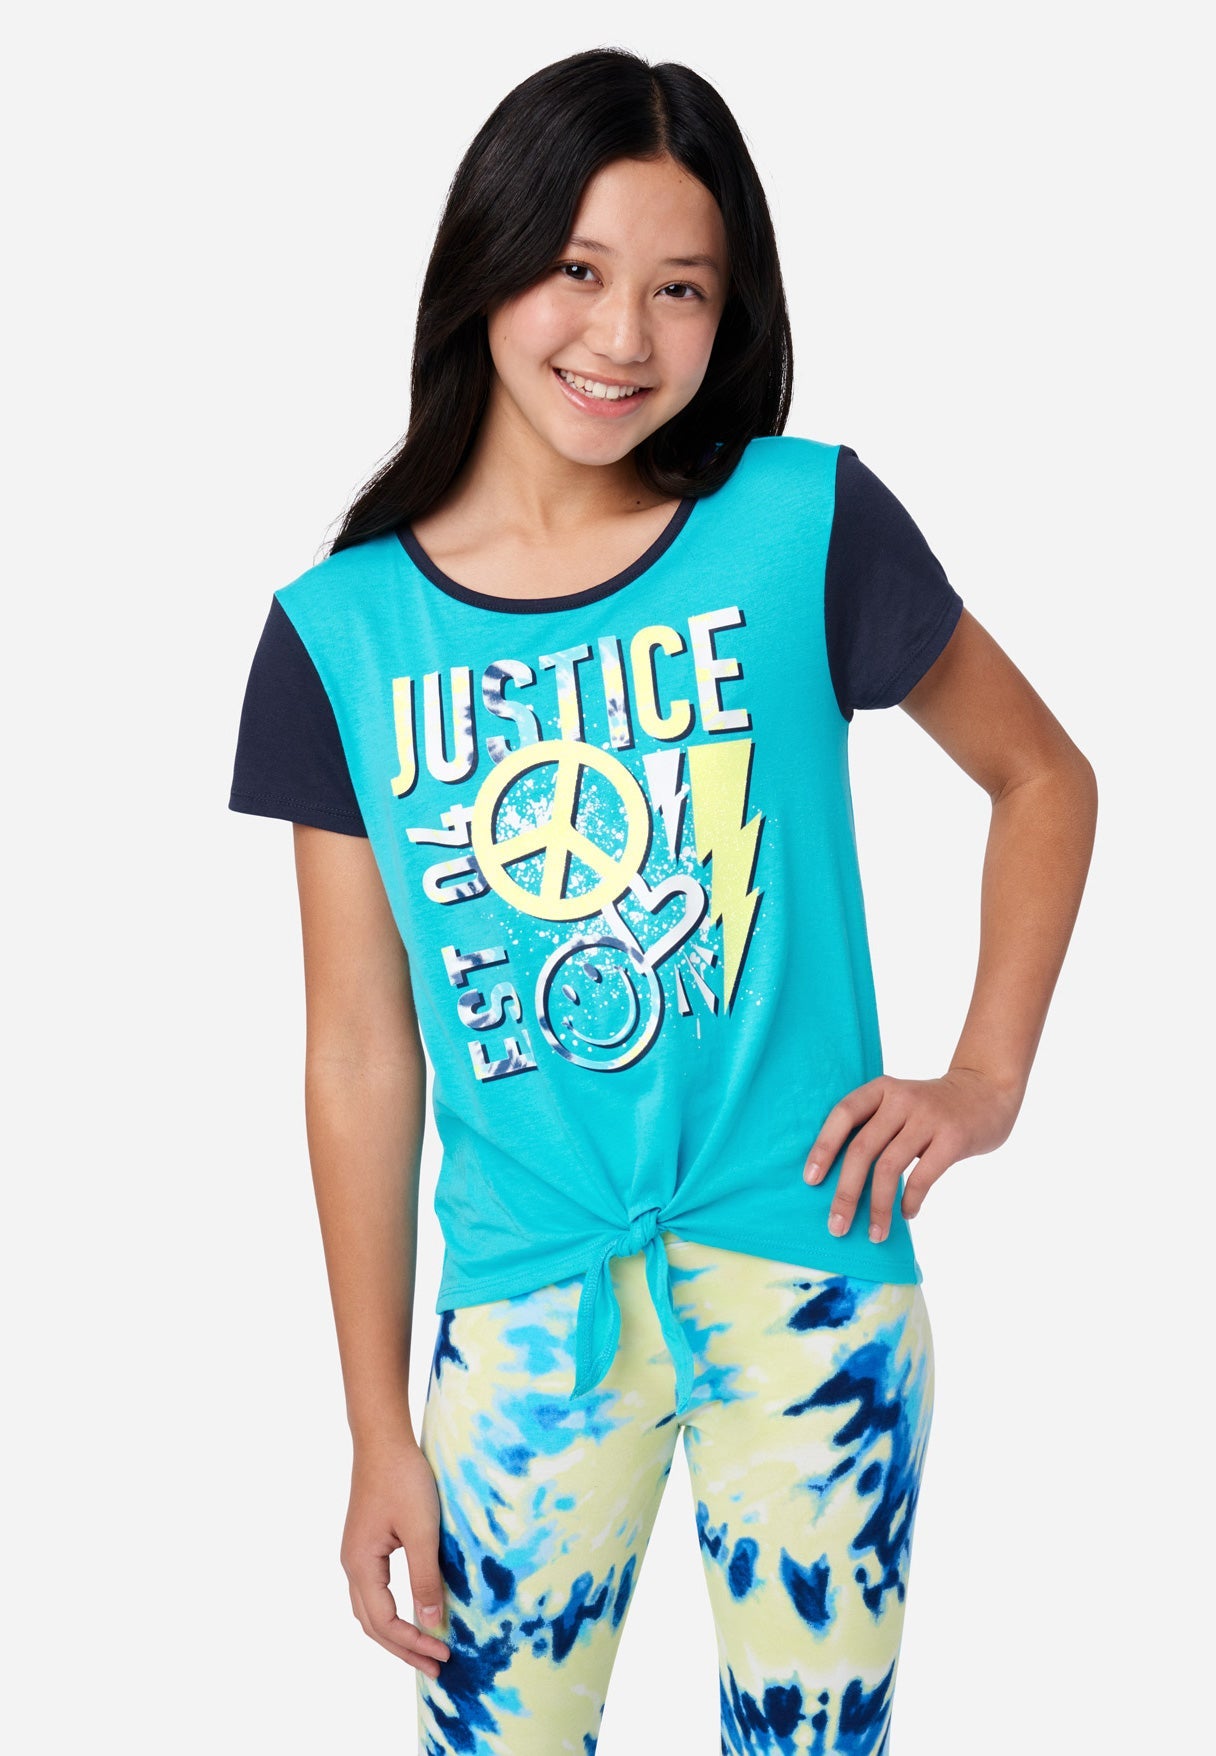 Justice Tie Front SS Graphic Girl's Tee in Noal Turquoise, Size Small (7/8)